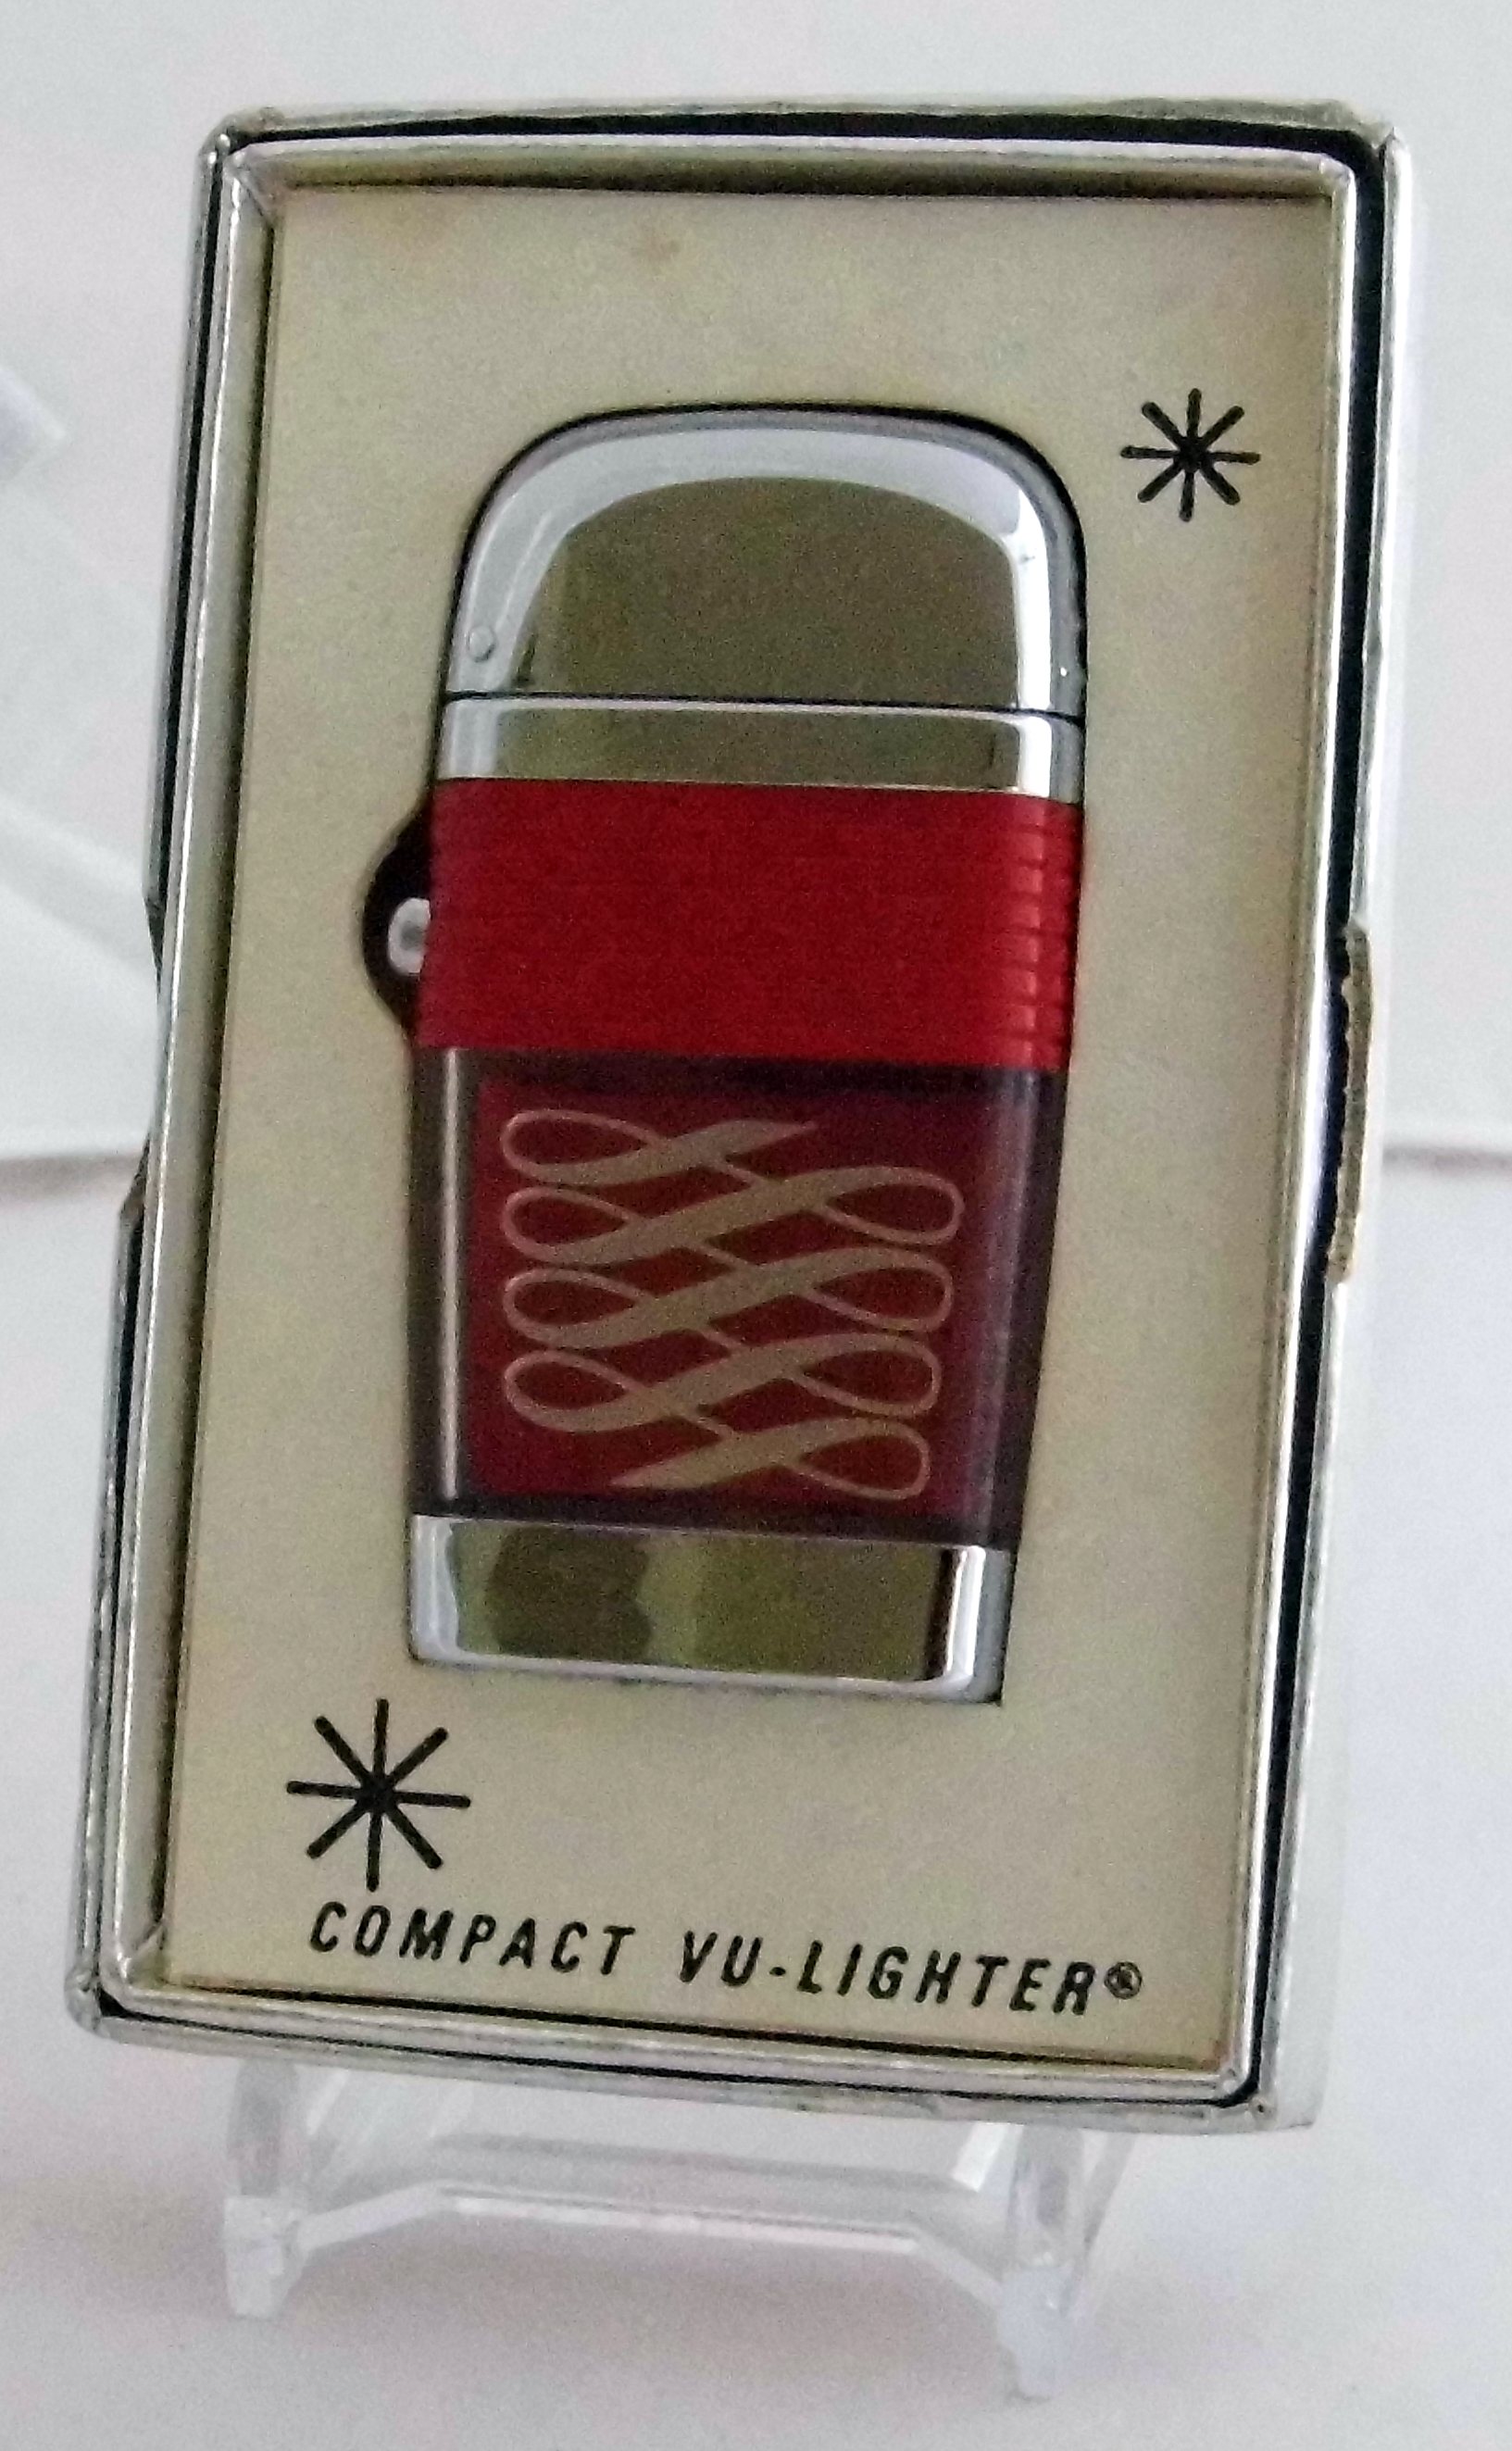 File:Vintage Cigarette Lighter - Scripto Vu-Lighter With Supply, Made In USA (14514100936).jpg - Wikimedia Commons